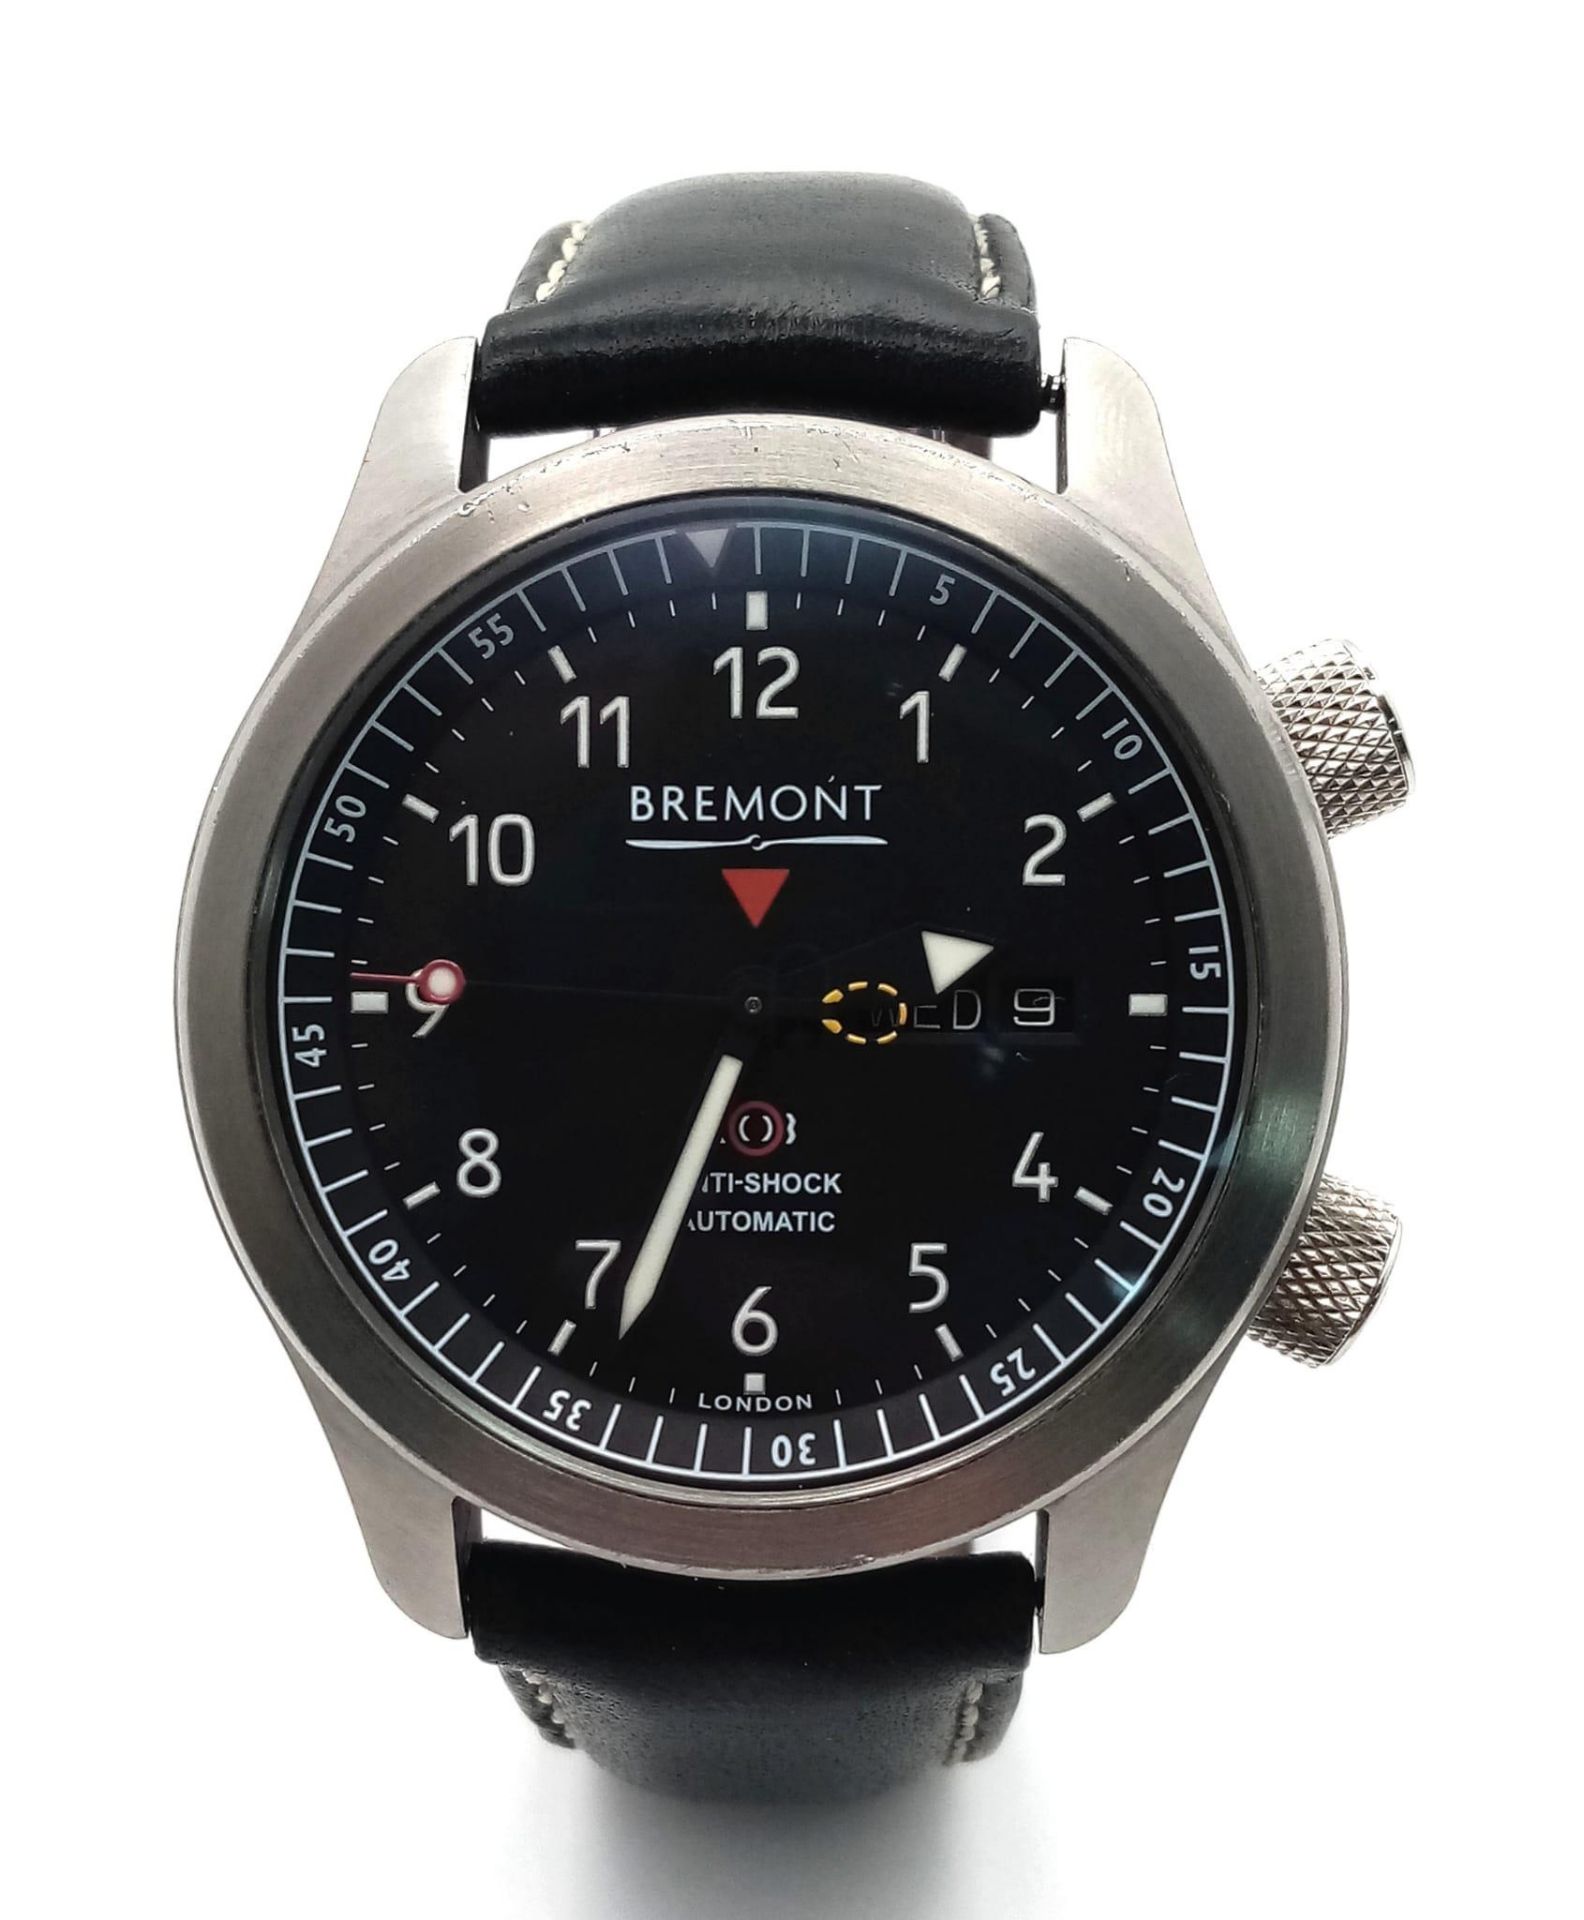 A STYLISH "BREMONT" AUTOMATIC CHONOMETER WITH ORIGINAL BOX AND RECEIPT ALSO COMES WITH WATCH - Image 2 of 10